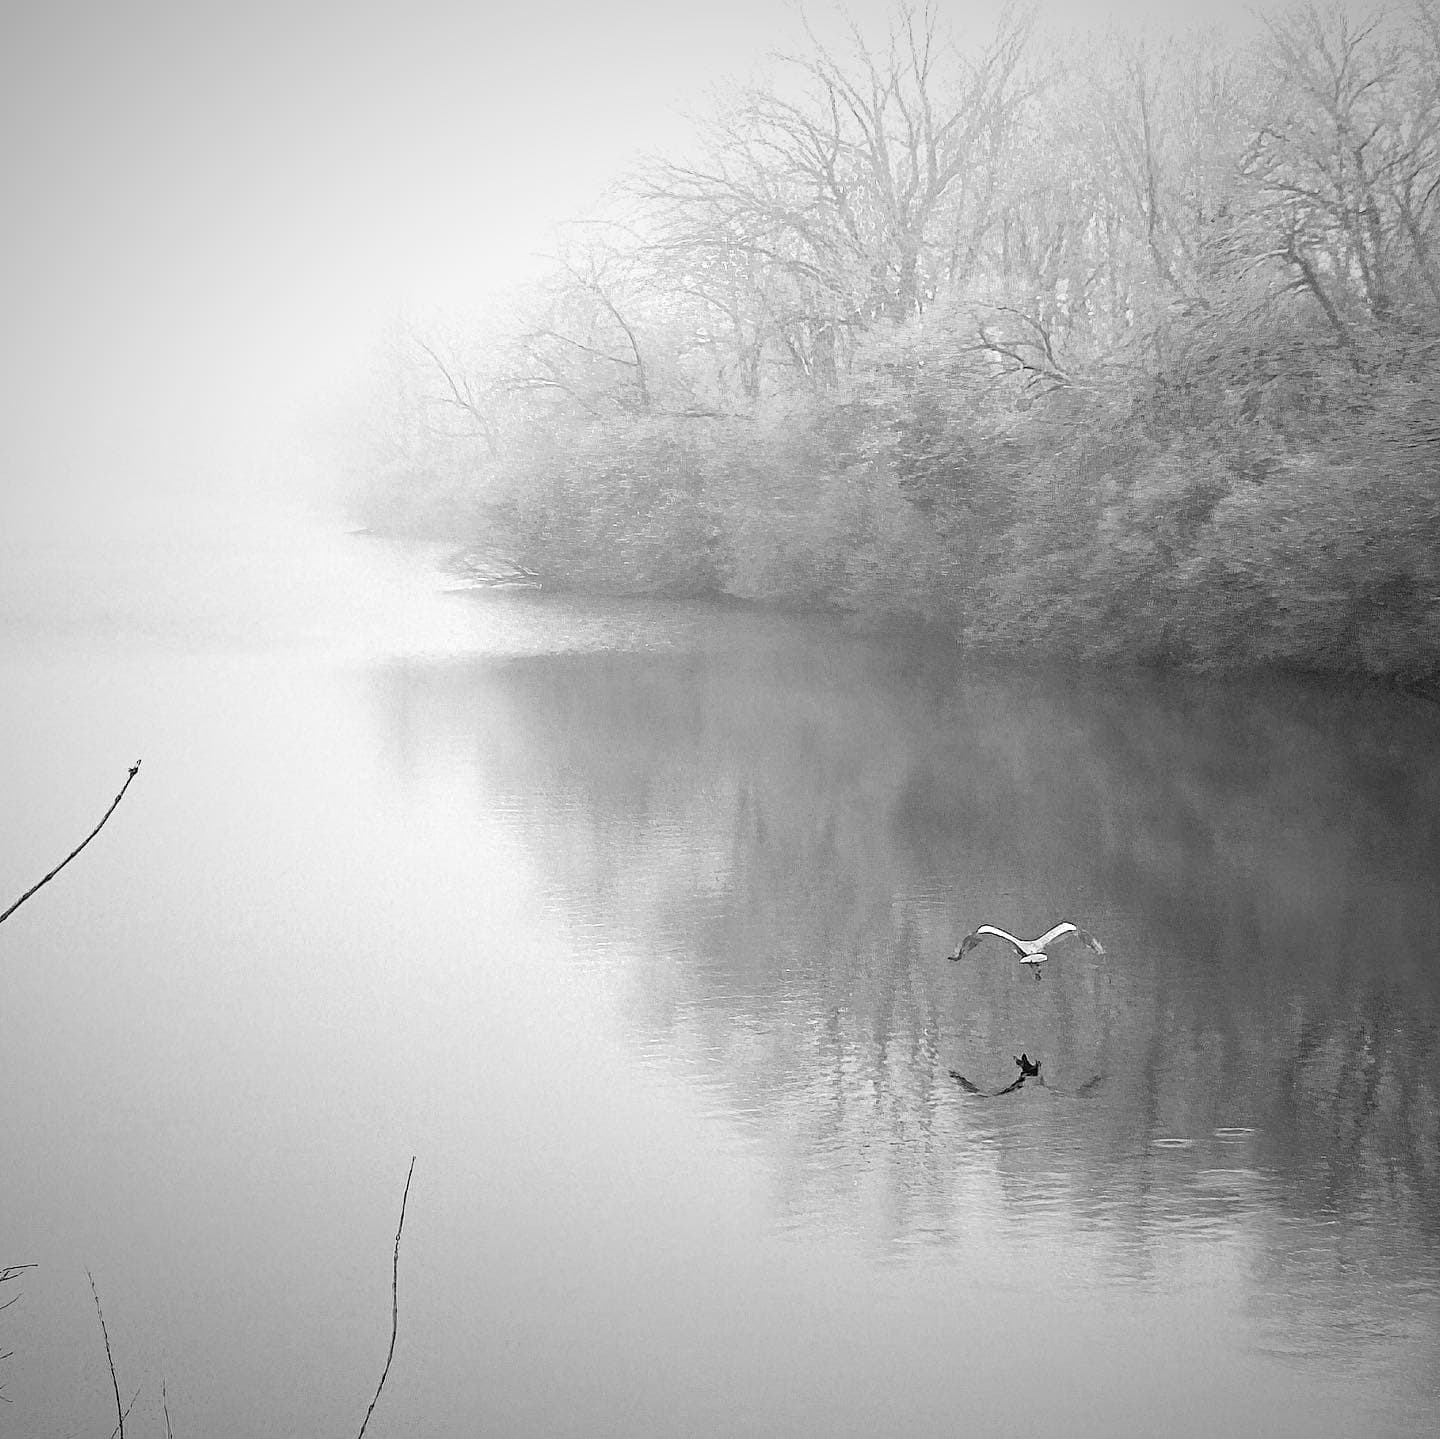 black and white of frozen water with a bird flying close to the water's surface